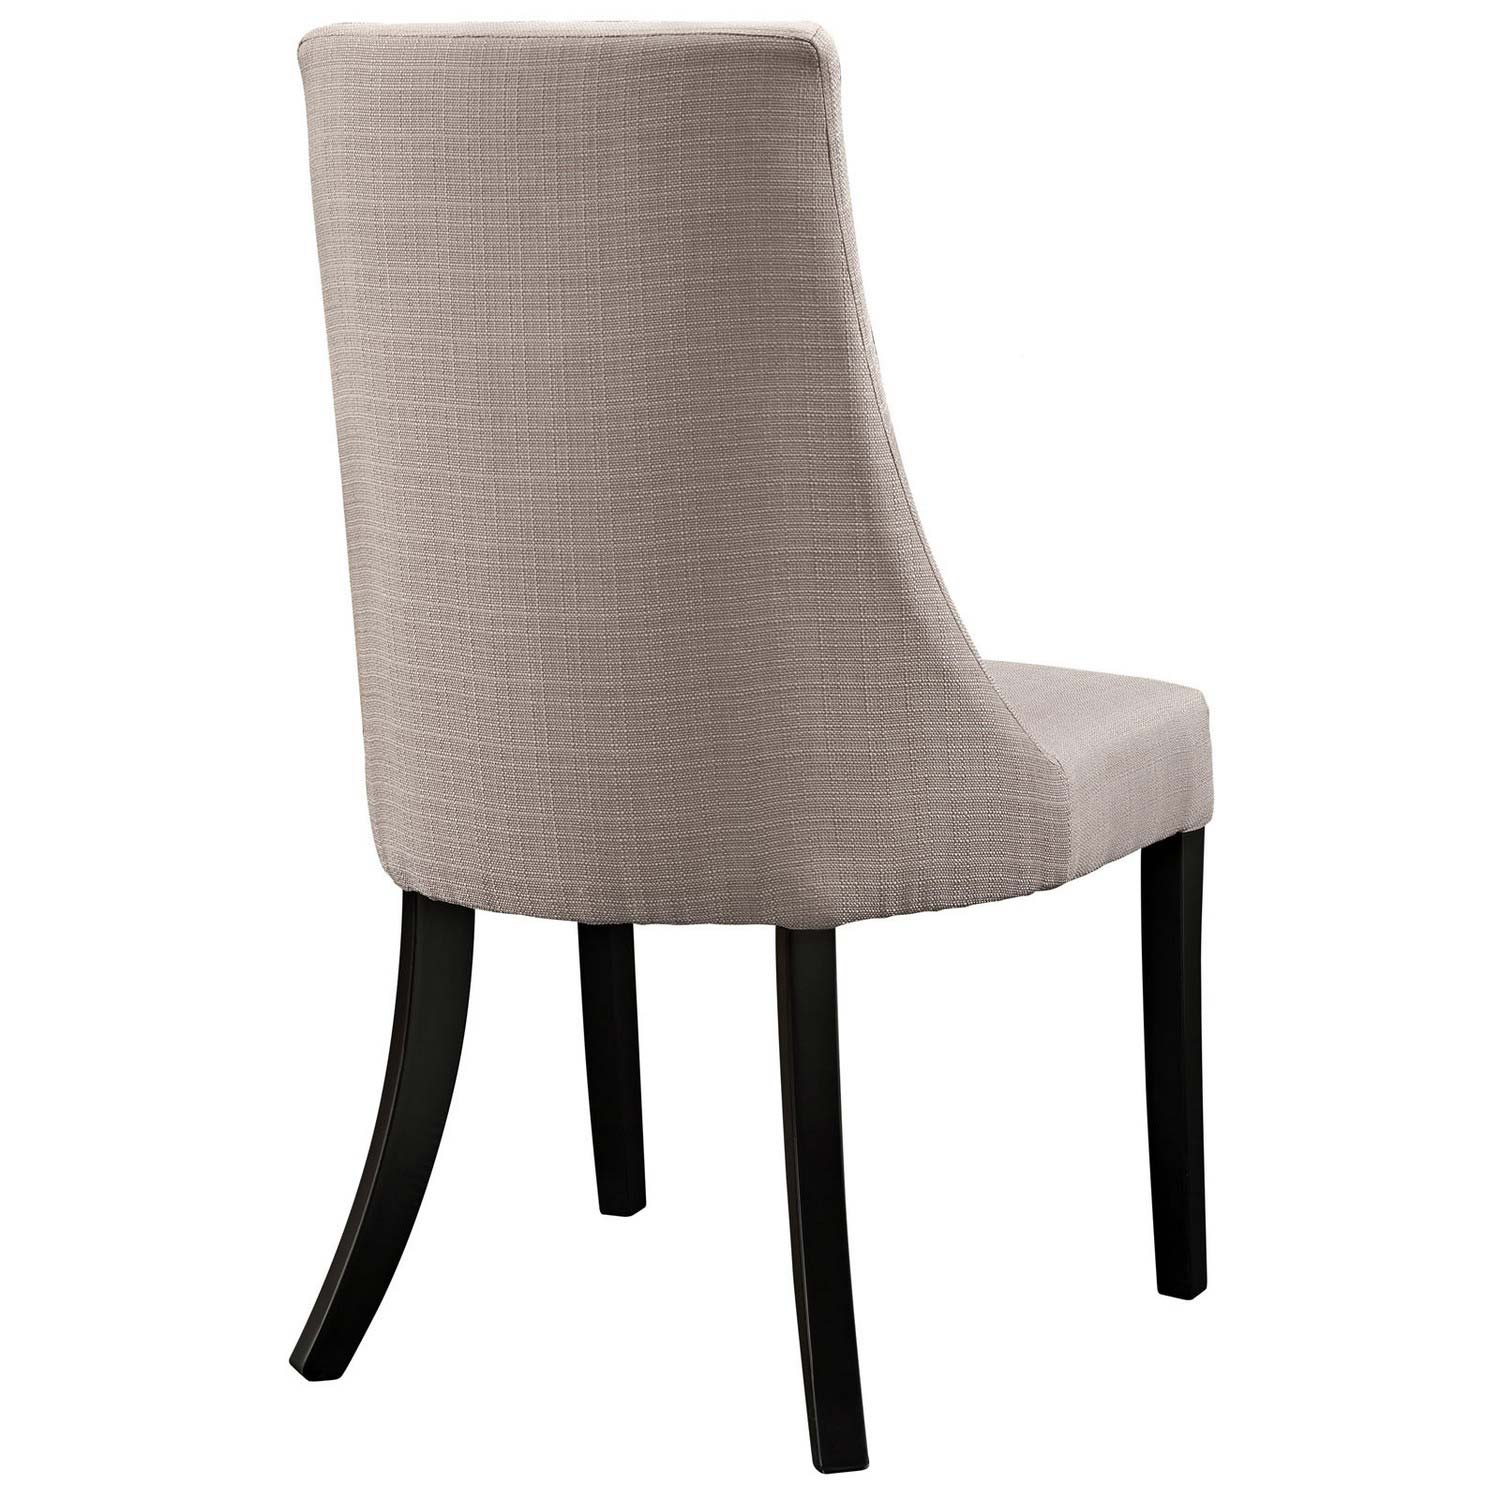 Modway Reverie Dining Side Chair Set of 4 - Beige